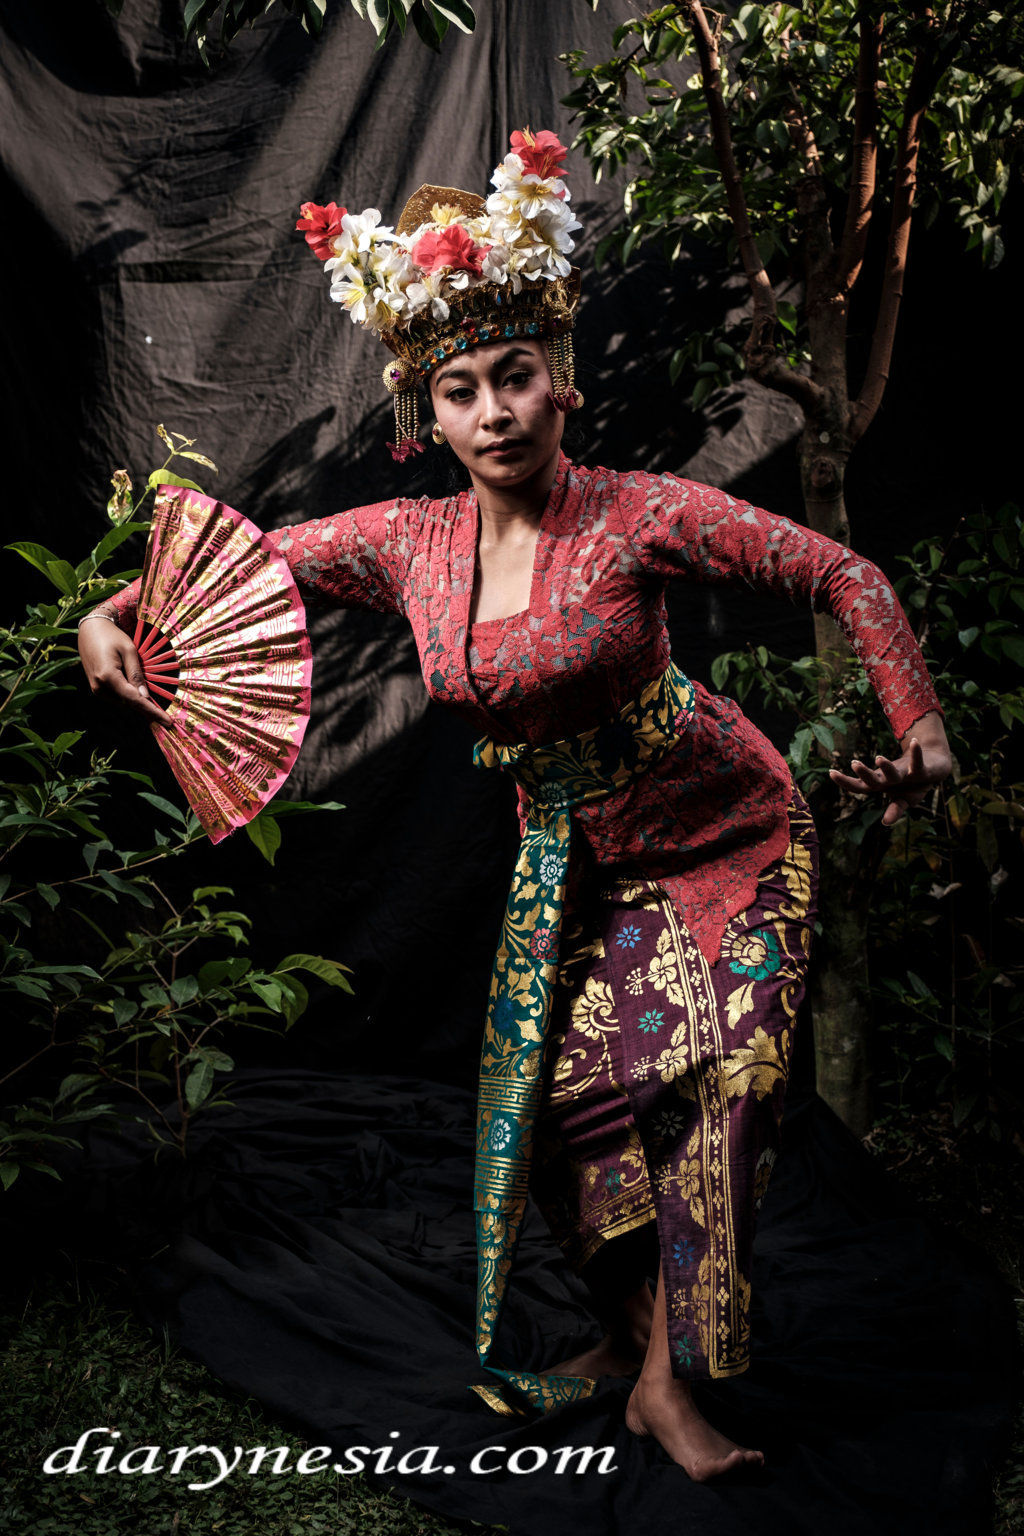 all about traditional balinese dance, how to see traditional balinese dancing, bali tourism, diarynesia